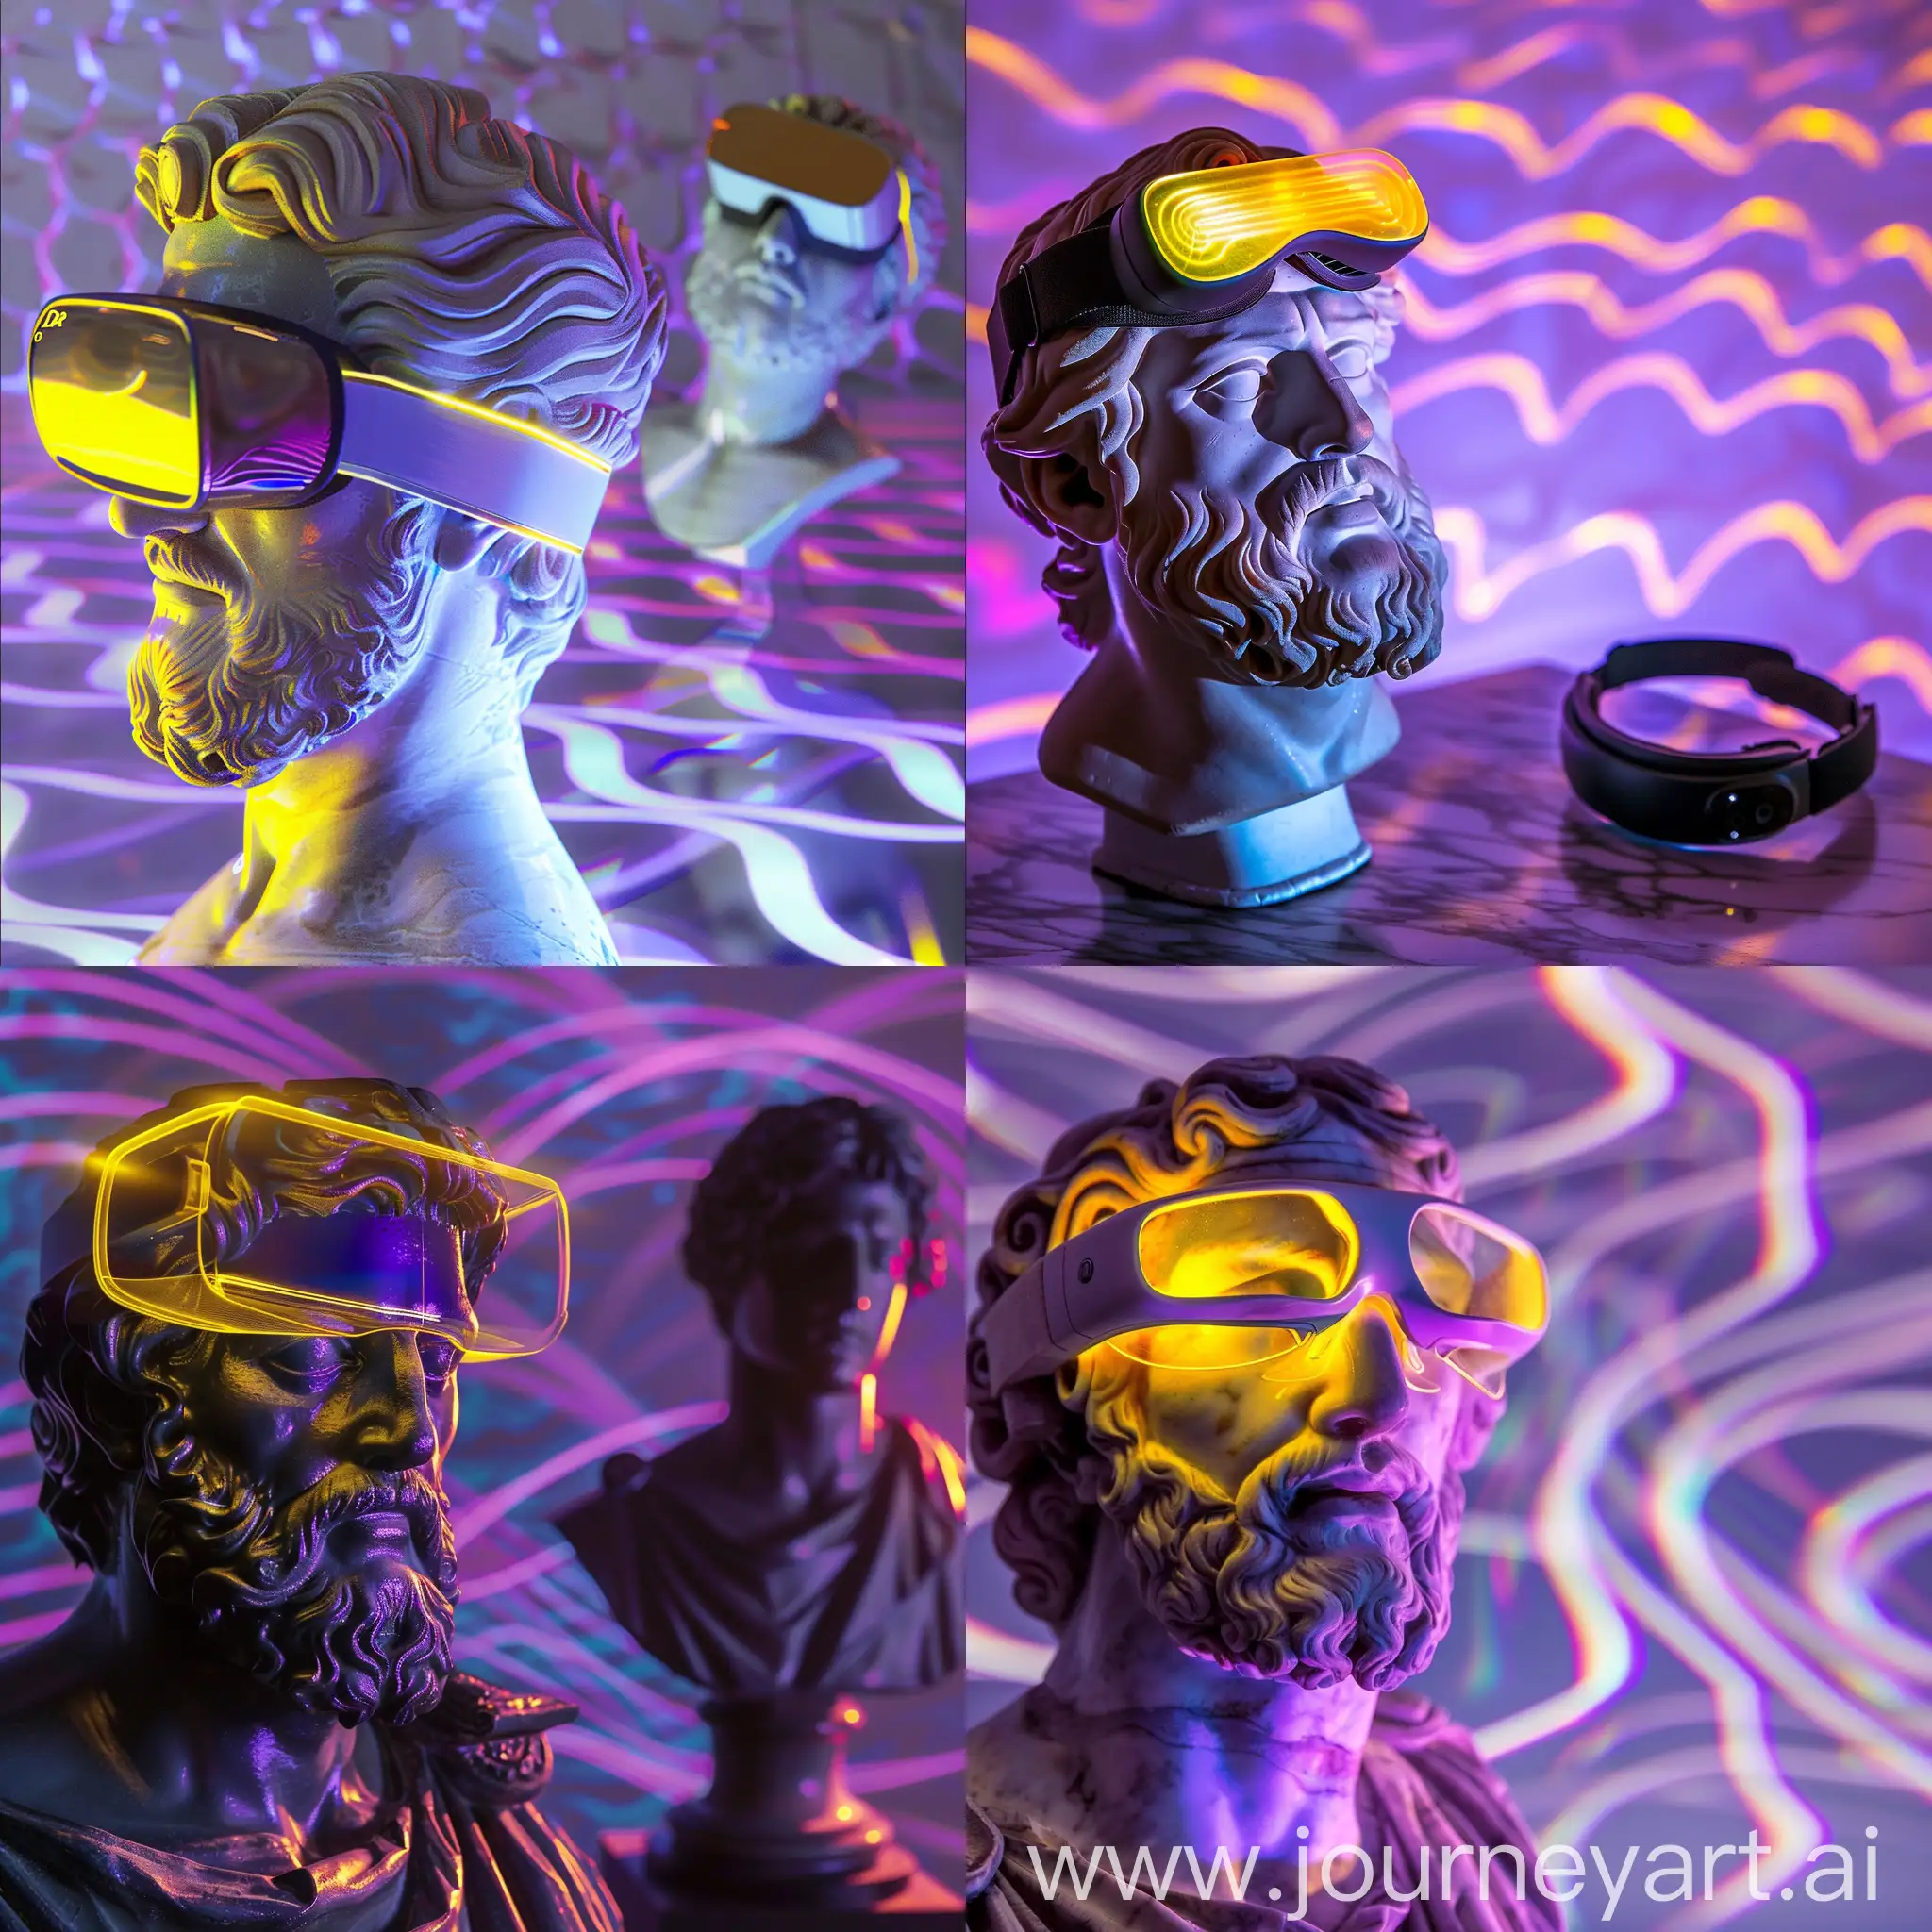 Bust-Style-Greek-Philosopher-Sculpture-with-VR-Glasses-and-Purple-Reflections